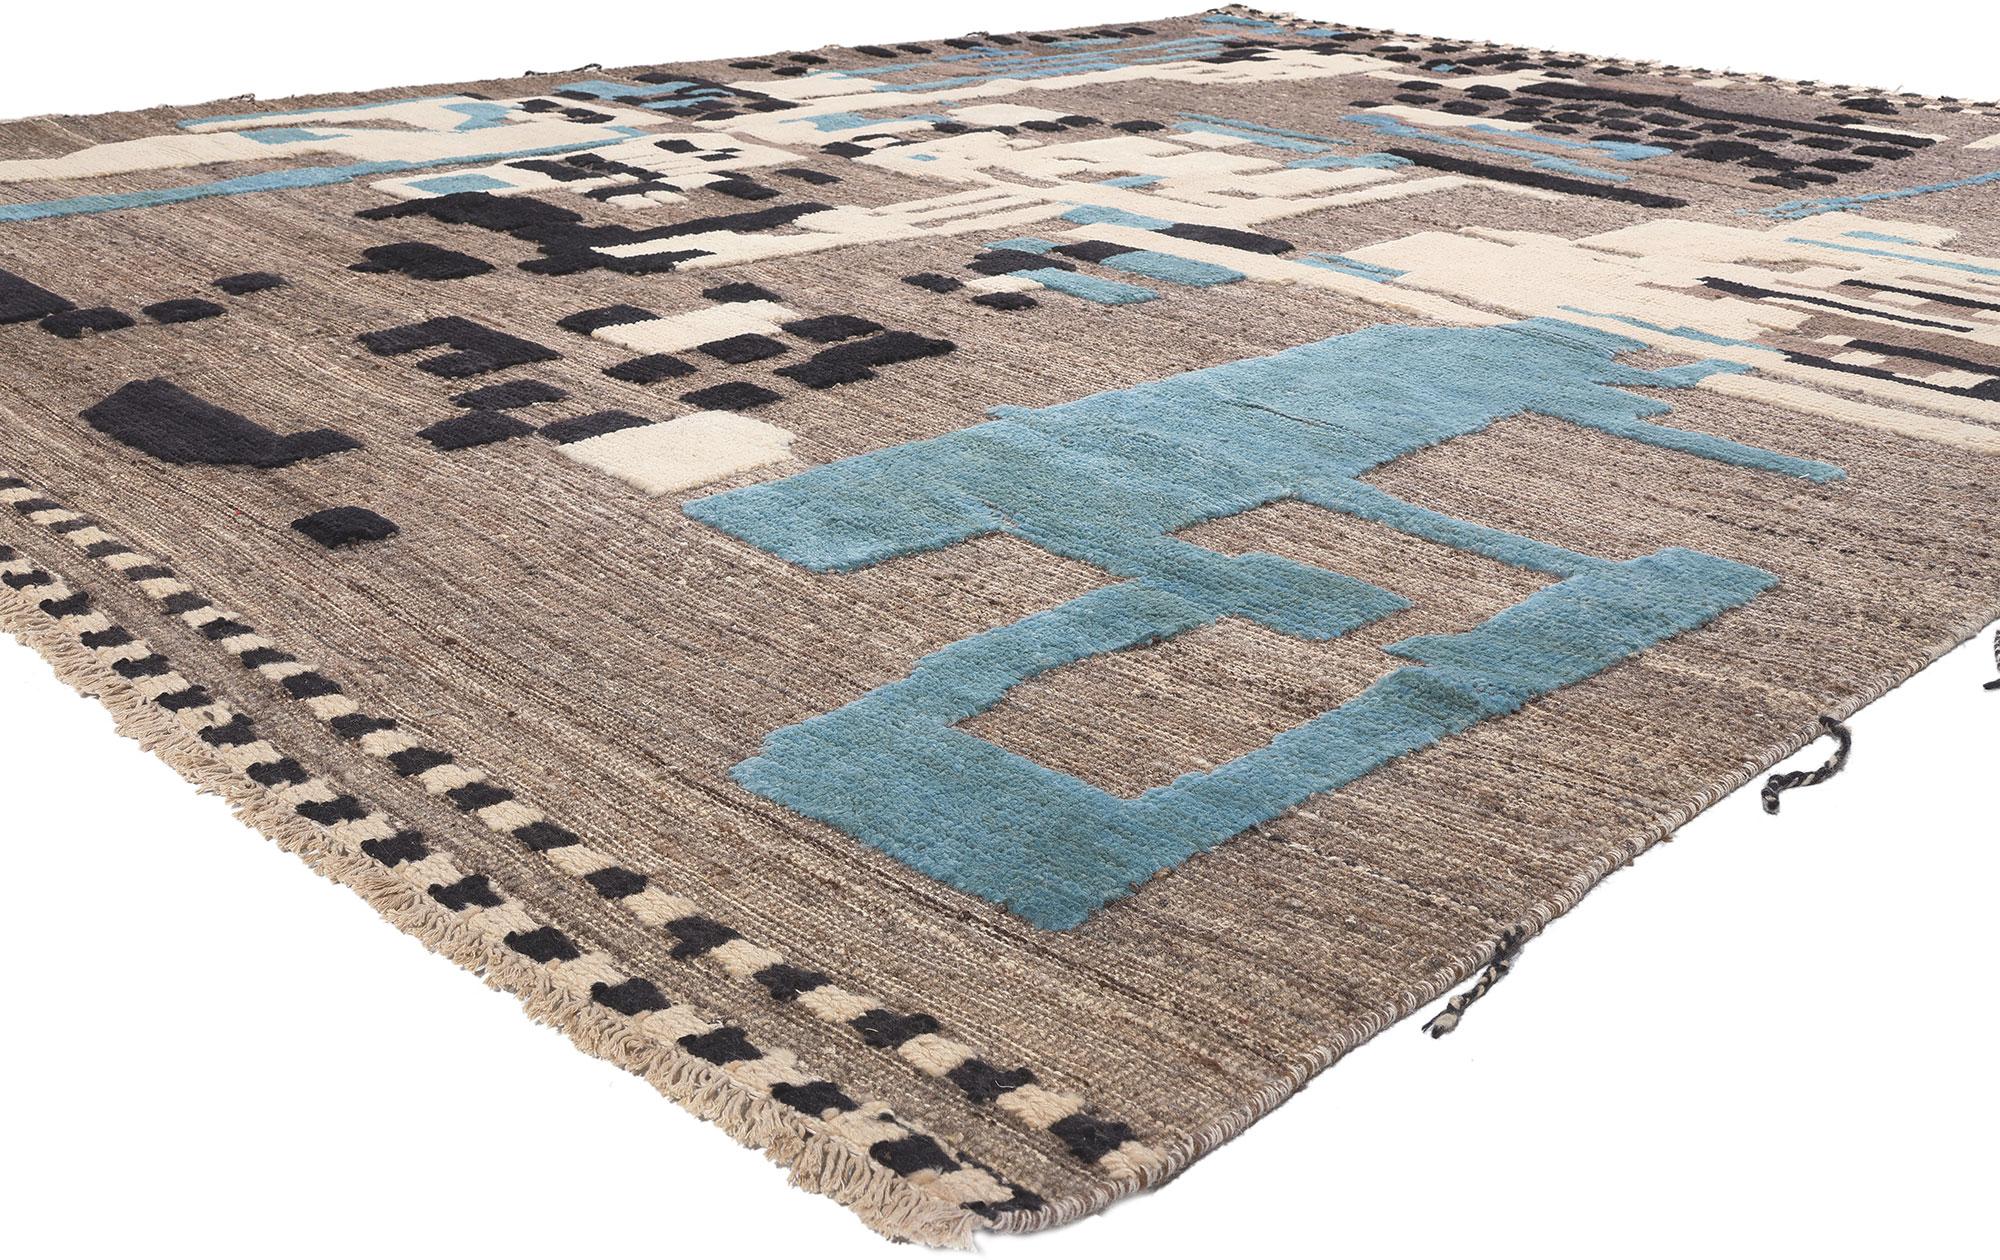 81007 Modern Moroccan High-Low Rug, 10'02 x 13'00. Emanating Biophilic Design with incredible detail and texture, this large Moroccan high-low rug is a captivating vision of woven beauty. The raised design and earthy colorway woven into this